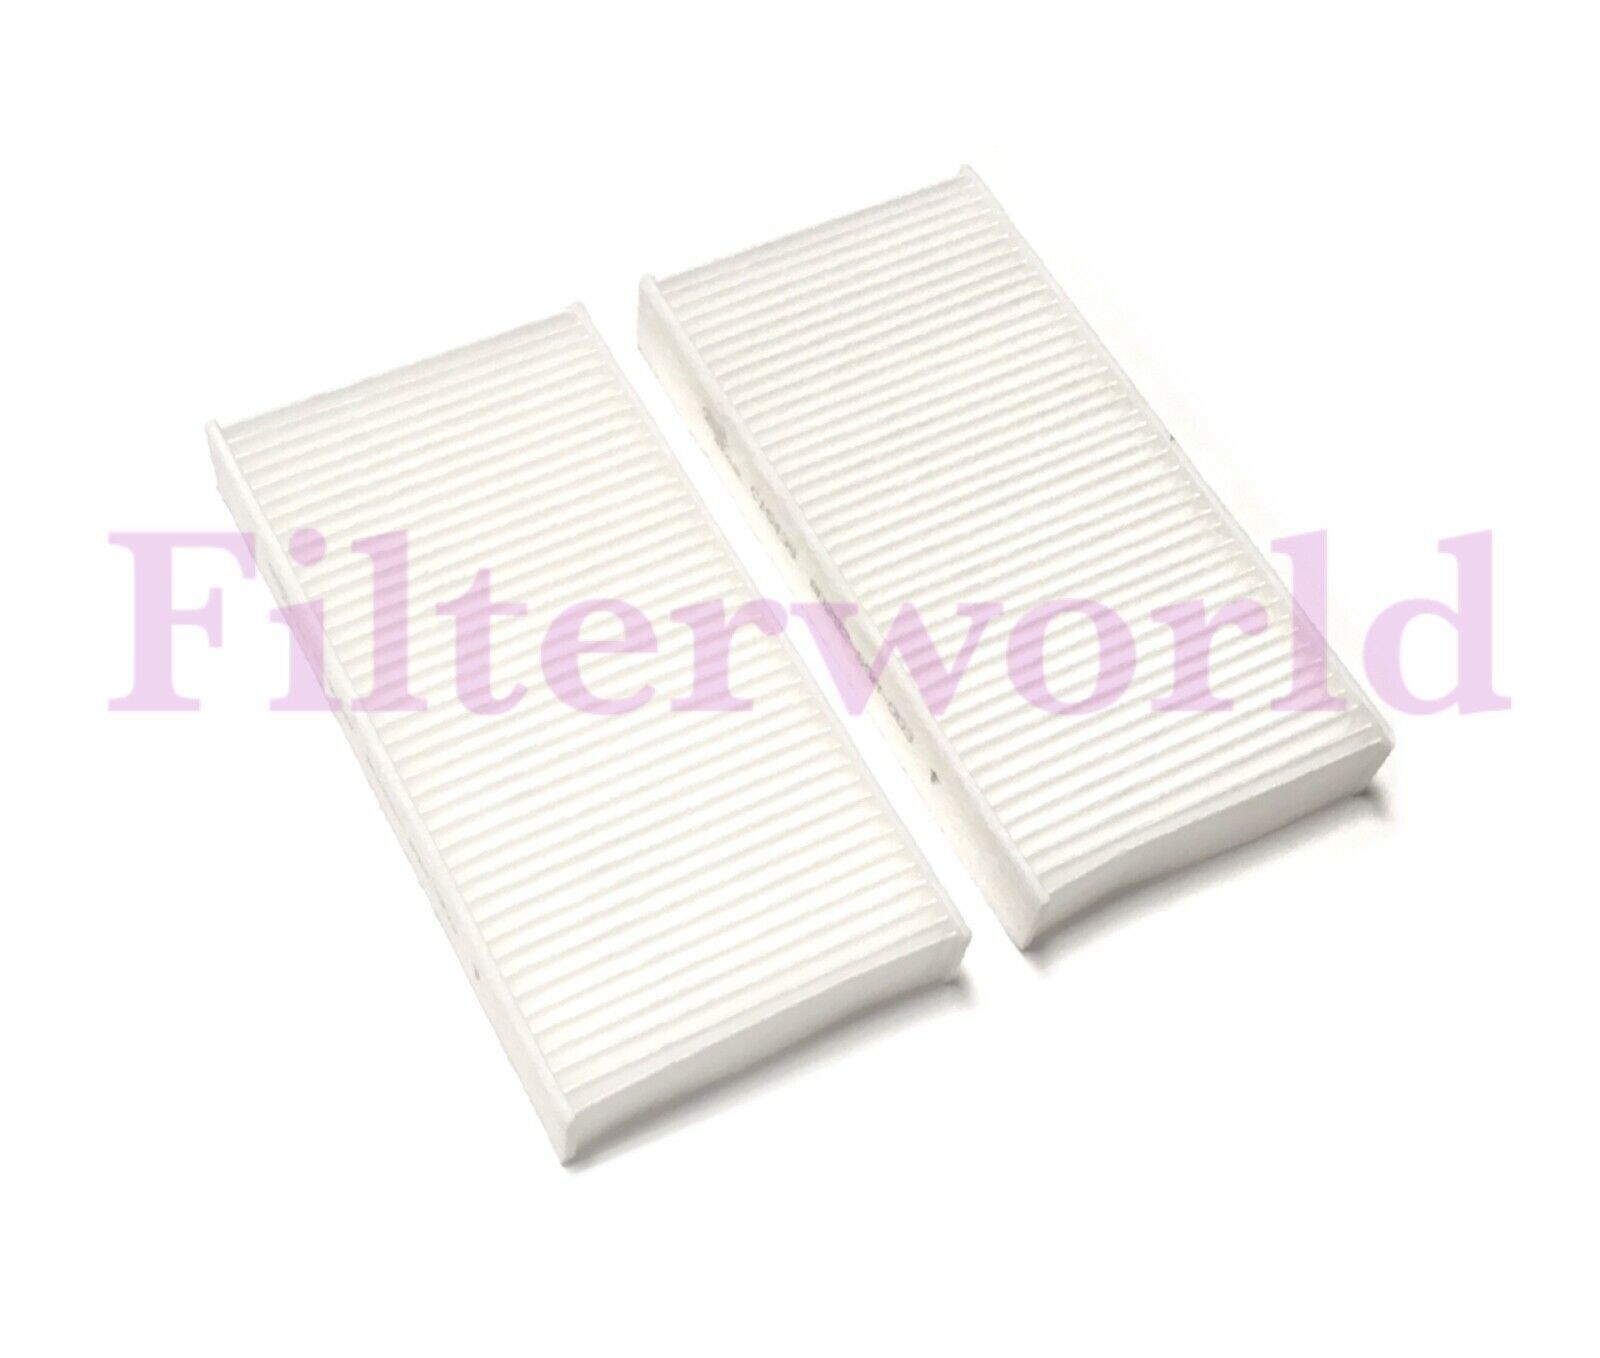 Cabin Air Filter For HONDA CIVIC 01-05 CR-V 02-06 ELEMENT 03-11 ACURA RSX 02-06